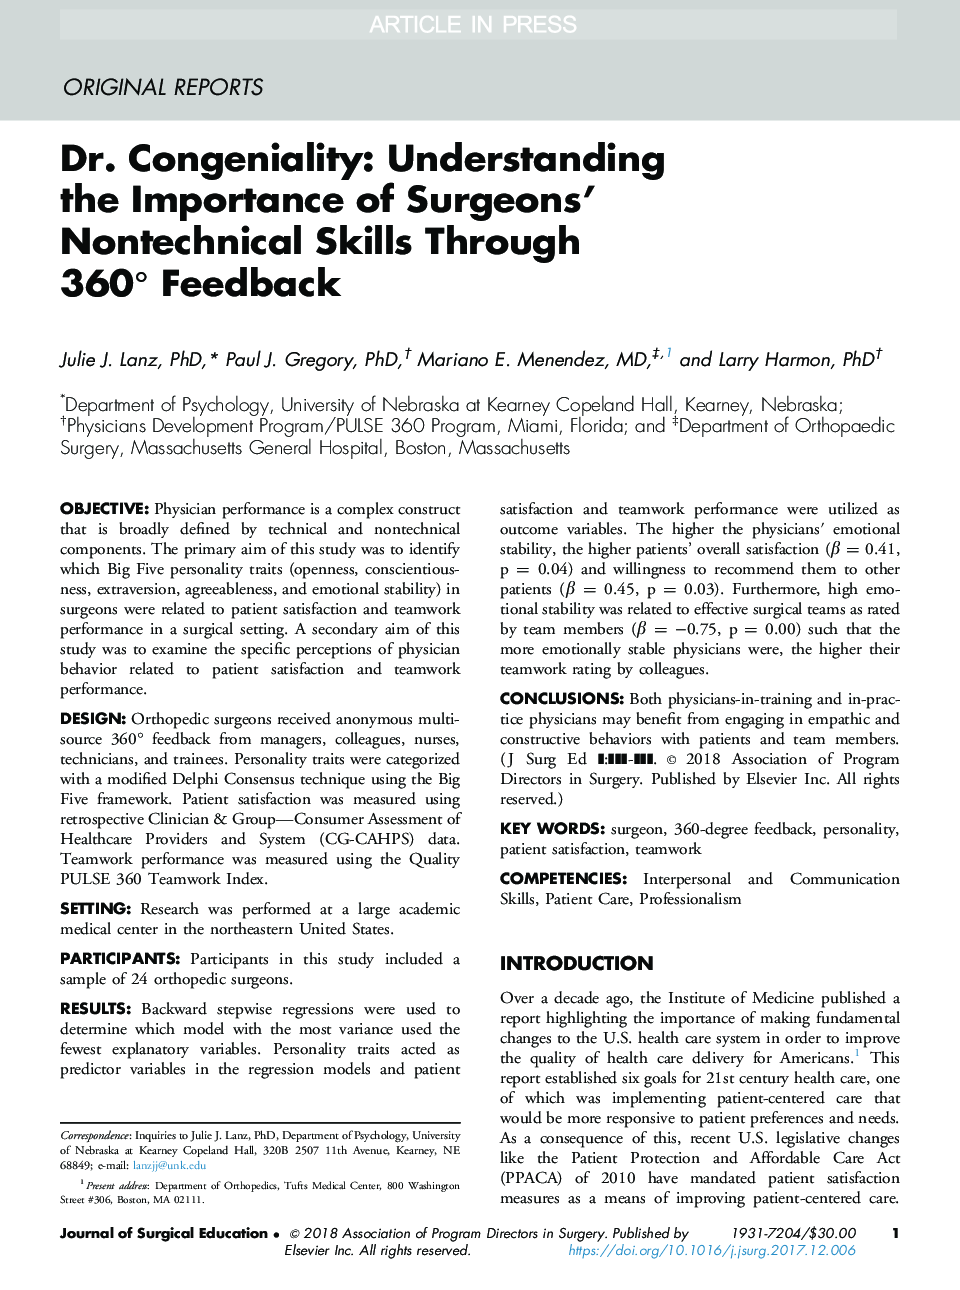 Dr. Congeniality: Understanding the Importance of Surgeons' Nontechnical Skills Through 360Â° Feedback